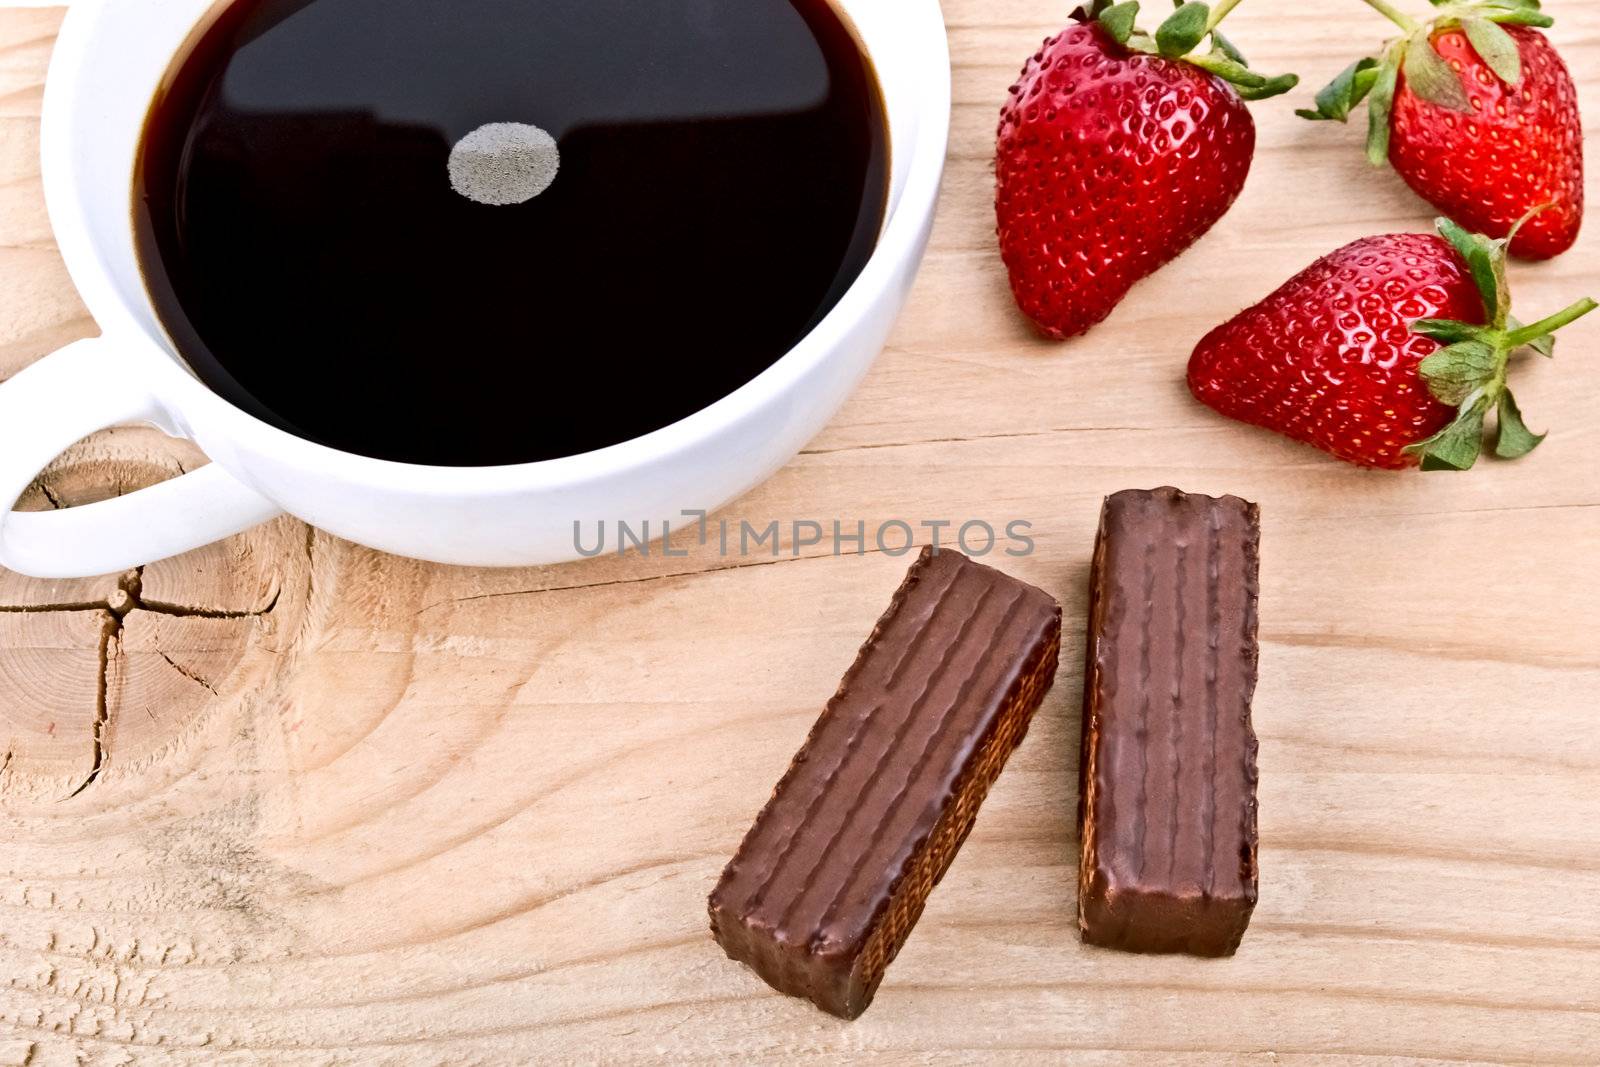 Strawberry with a cup of coffee and chocolate on wood by vician